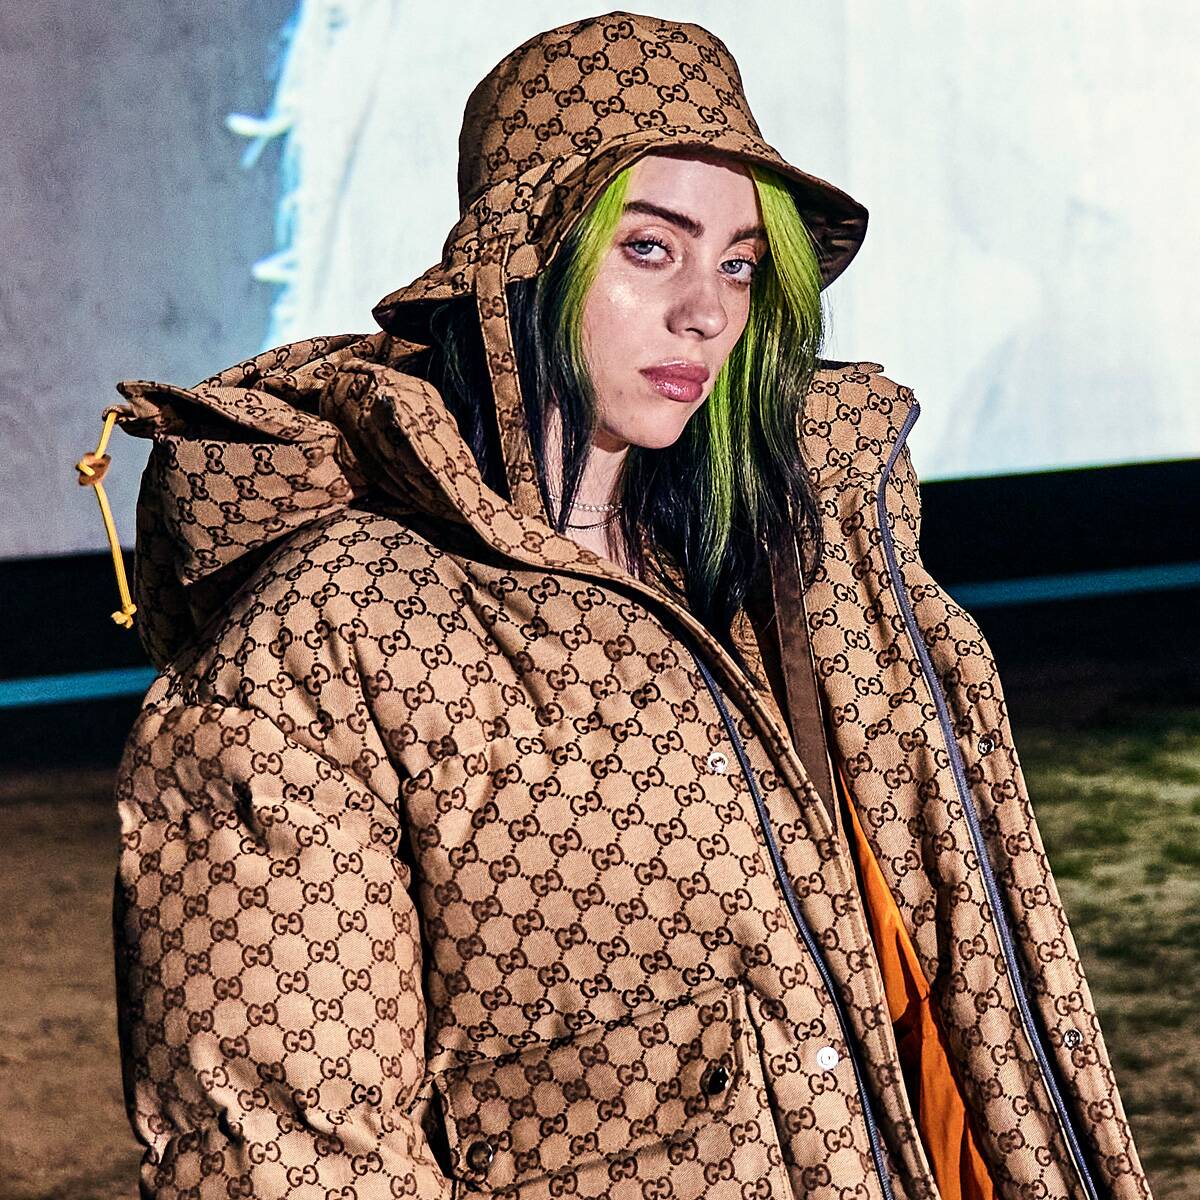 Billie Eilish’s Documentary Might Remind You of Britney Spears’ Story—But Here’s Why It’s So Different